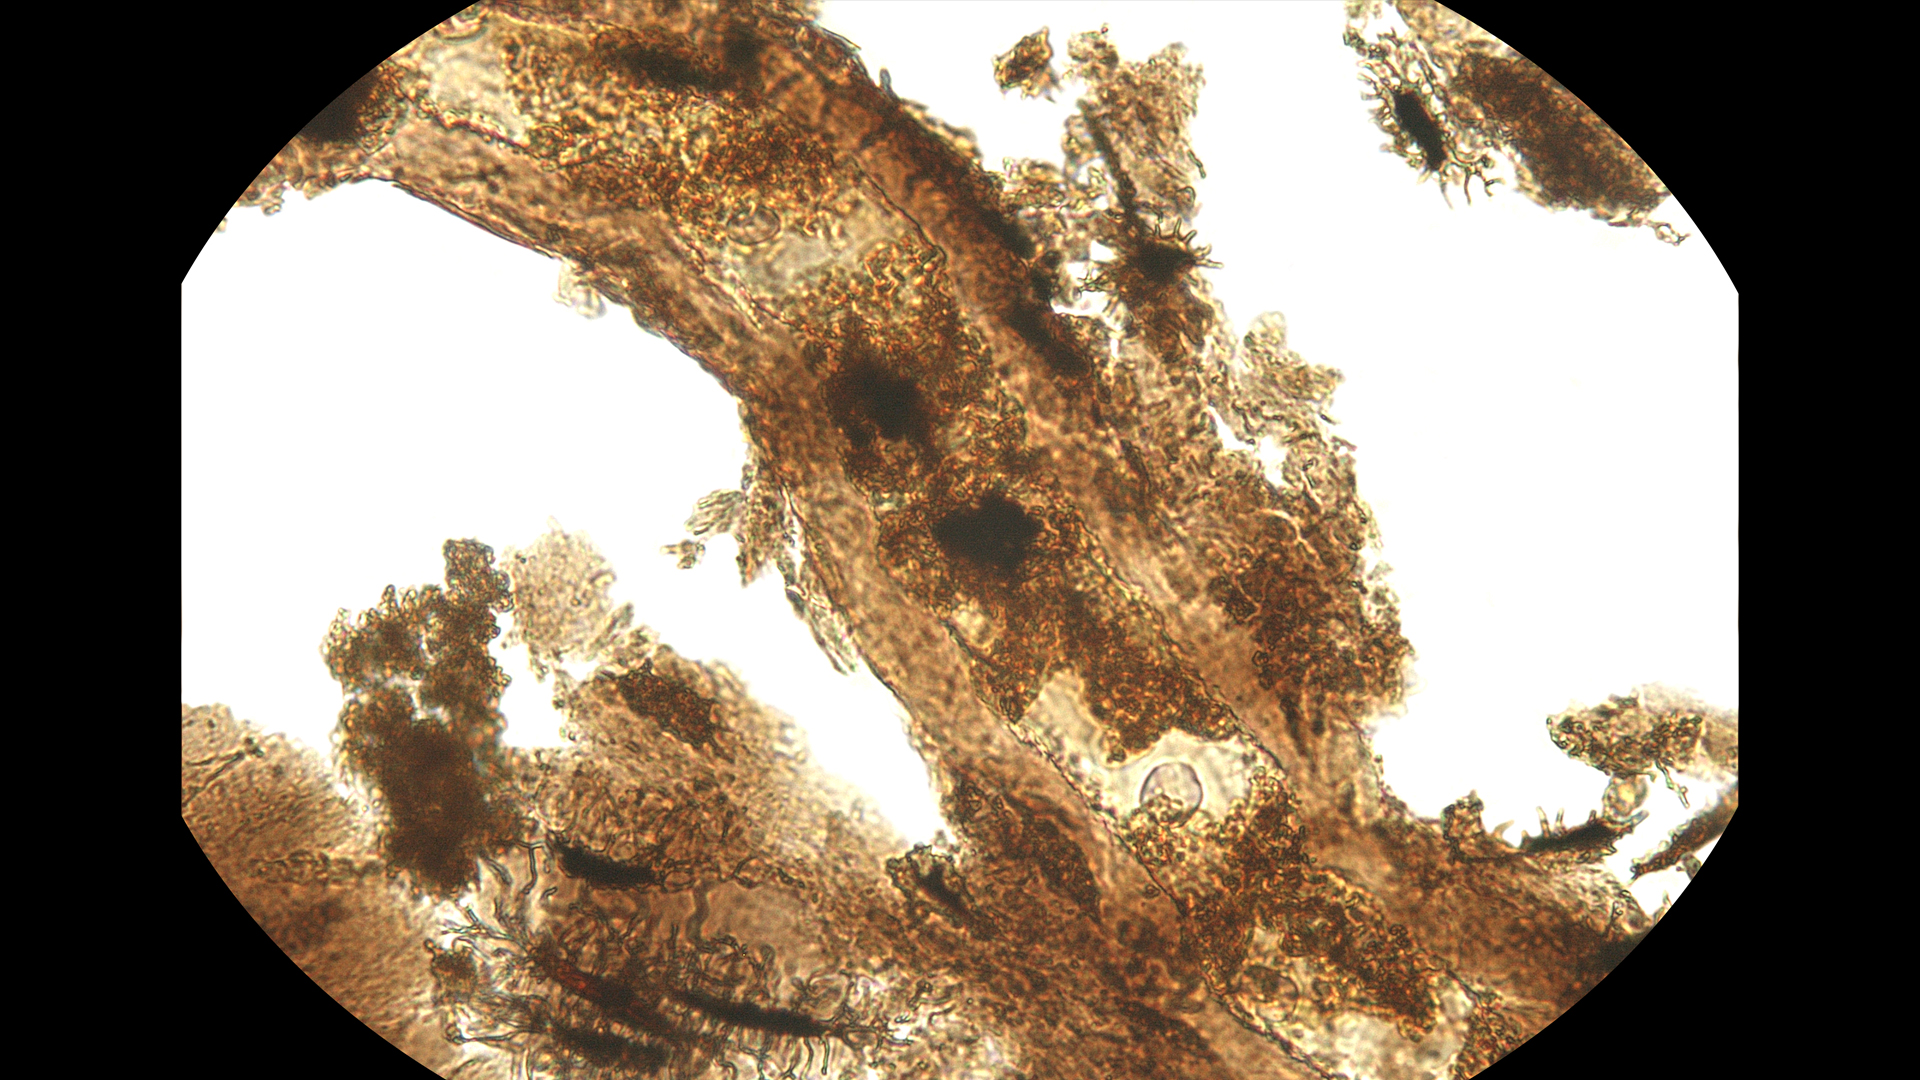 Microscopic view of extracted soft tissues from the bones of one of the dinosaur specimens (Allosaurus) analyzed for metabolic signals.